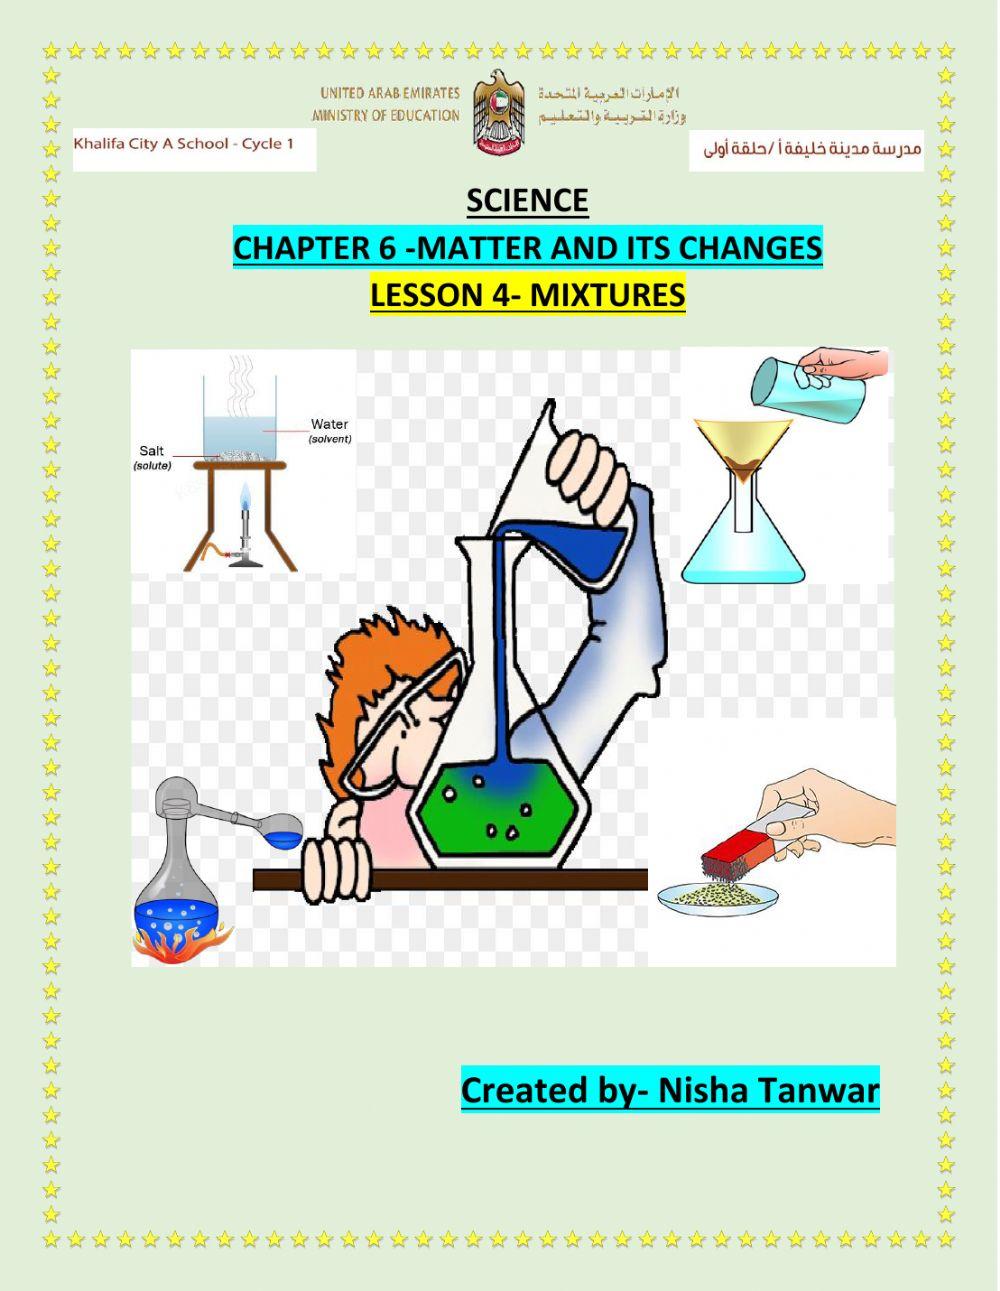 Chapter 6 lesson 4 -MIXTURES LAB